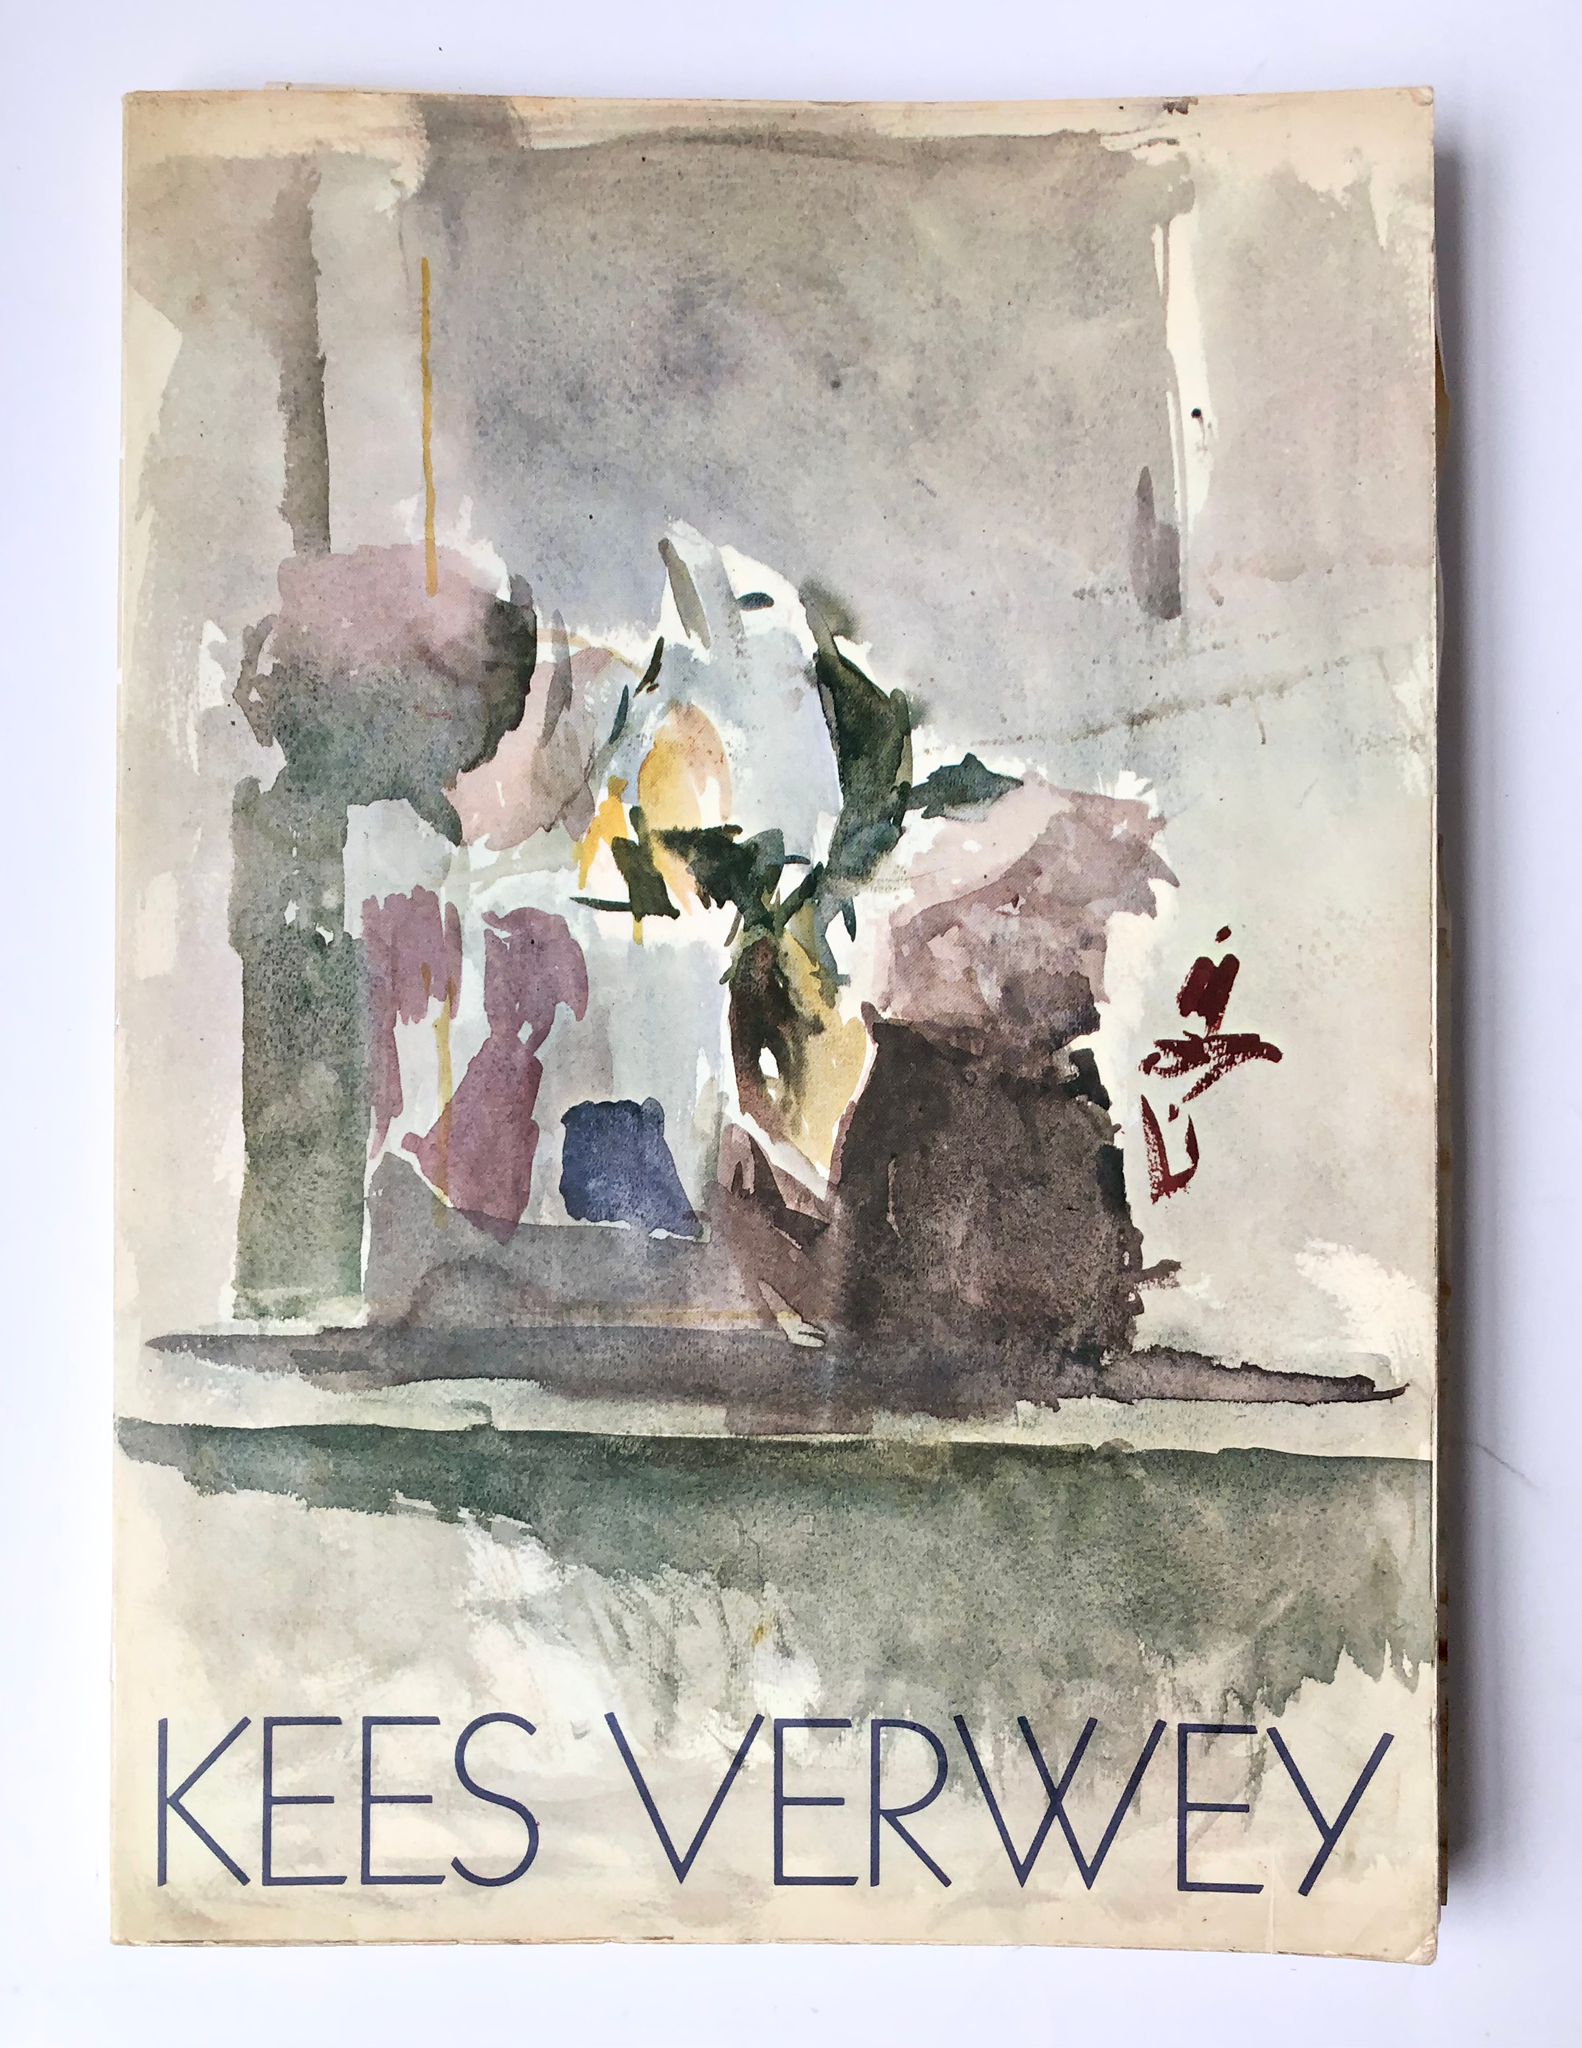  - [Catalogue by Verwey with autograph and three letters] Book of L. Tegenbosch, Kees Verwey, 1974, with handwritten assignment by Verwey to colleague artist Jan [Peeters] and Ineke. With three letters to Jan Peters.